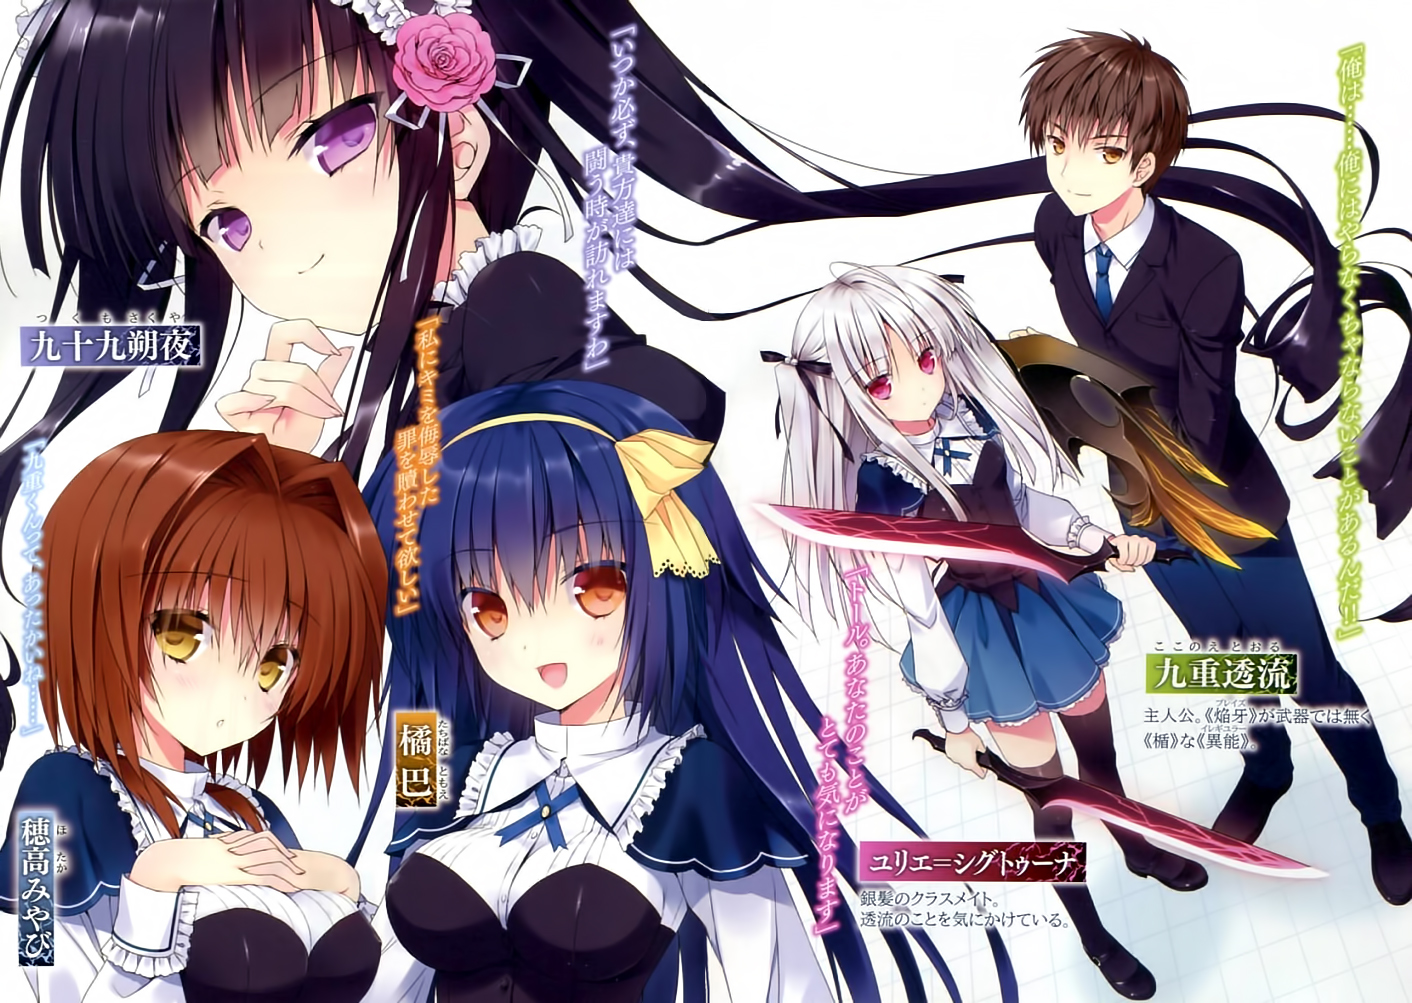 latest?cb=20141018035305 - Absolute Duo [Opening] [Ending] & [Ost] - Música [Descarga]